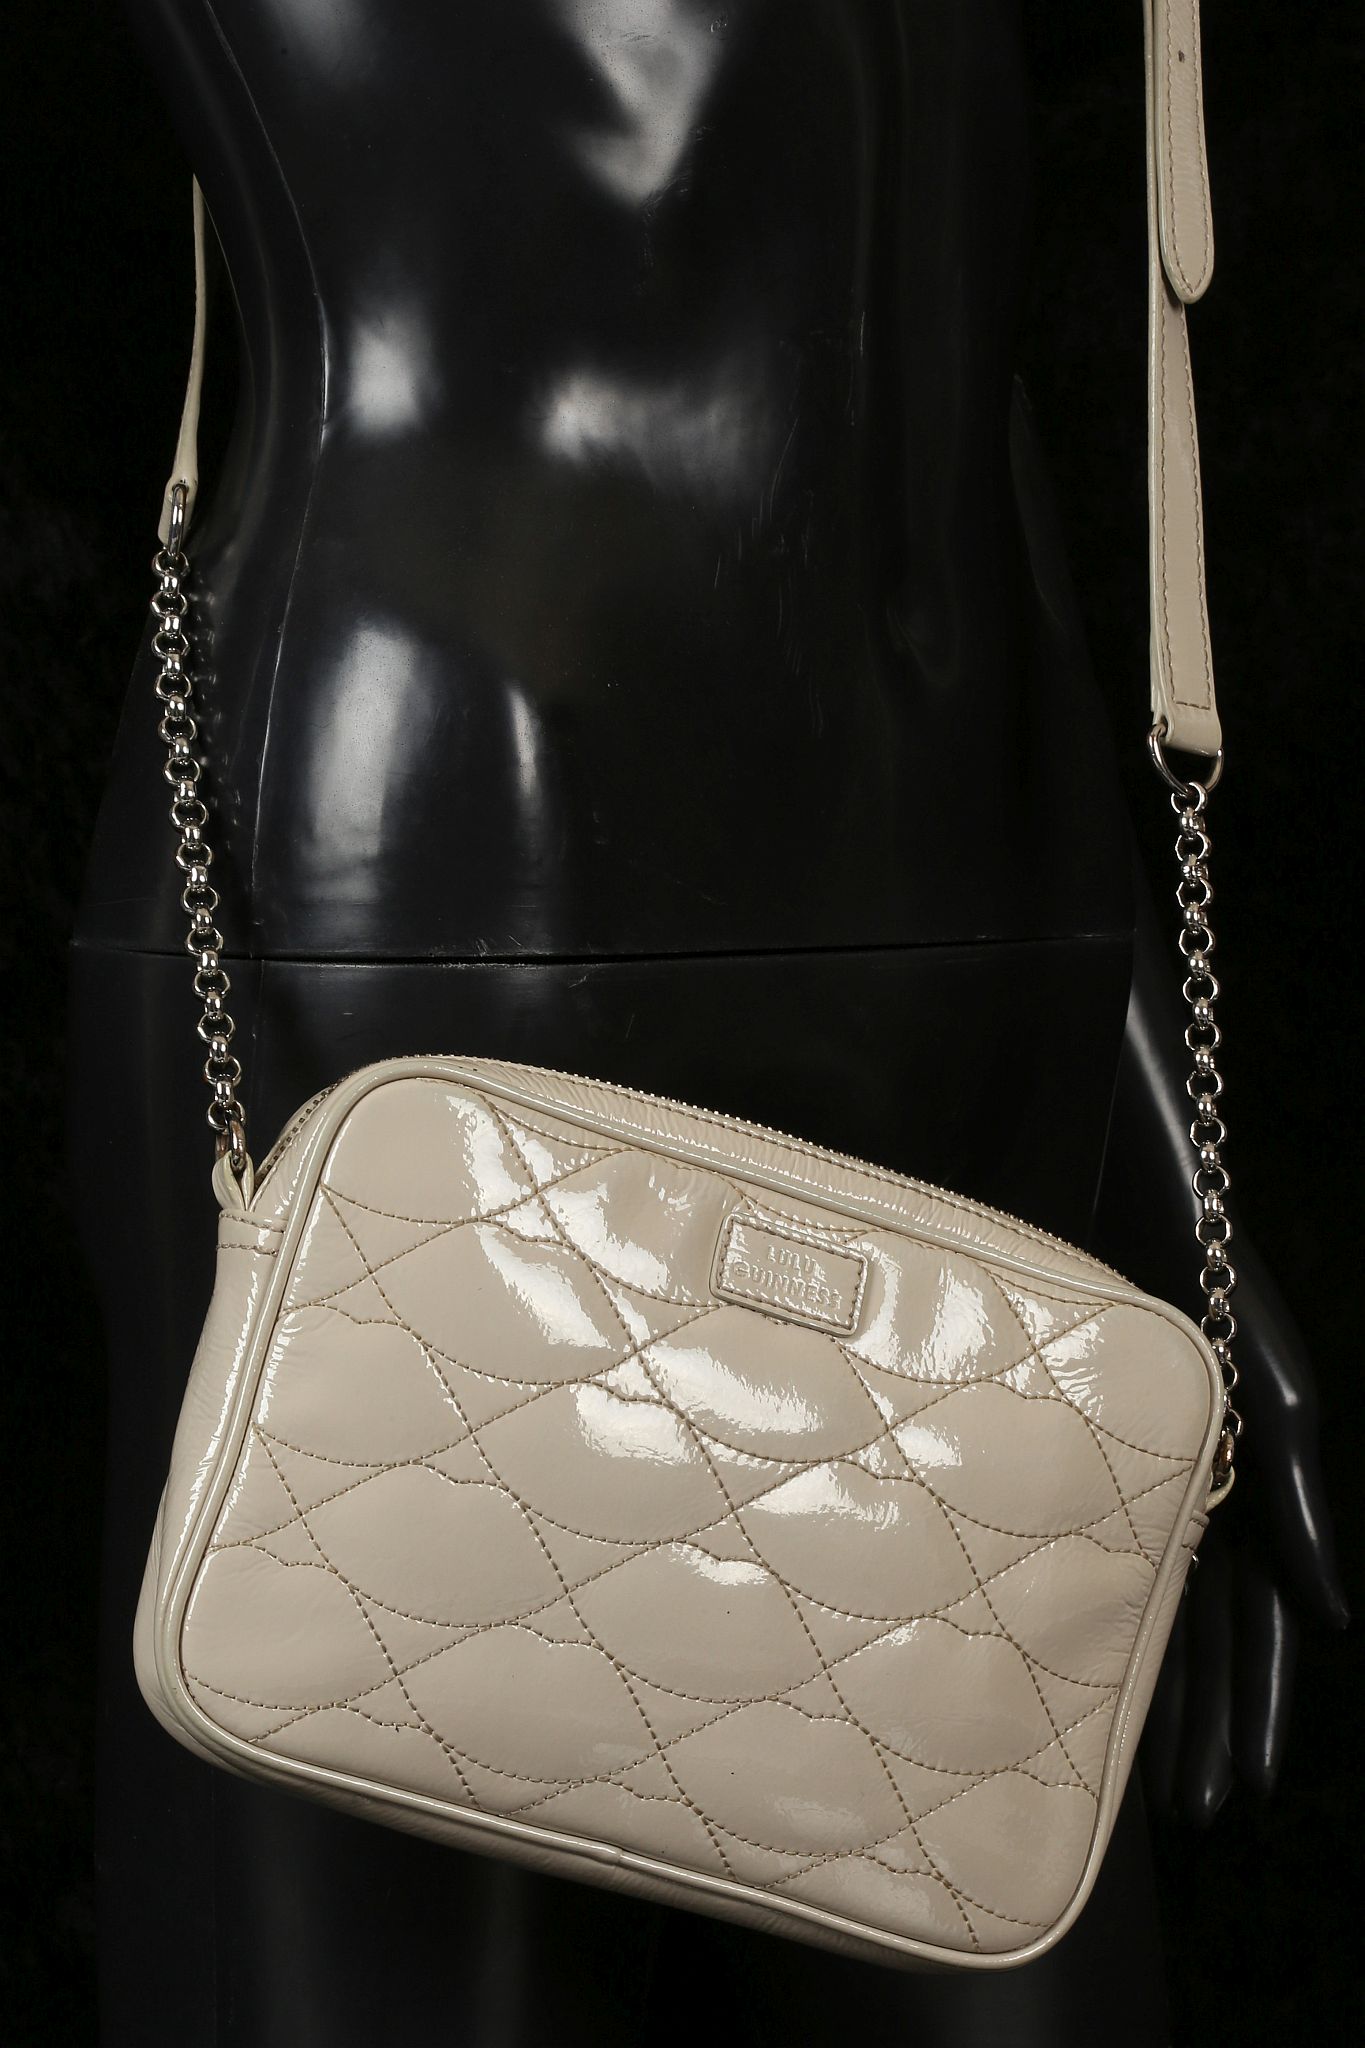 LULU GUINNESS LIPS HANDBAG, beige patent leather with stitched lips pattern, silver tone hardware, - Image 6 of 12